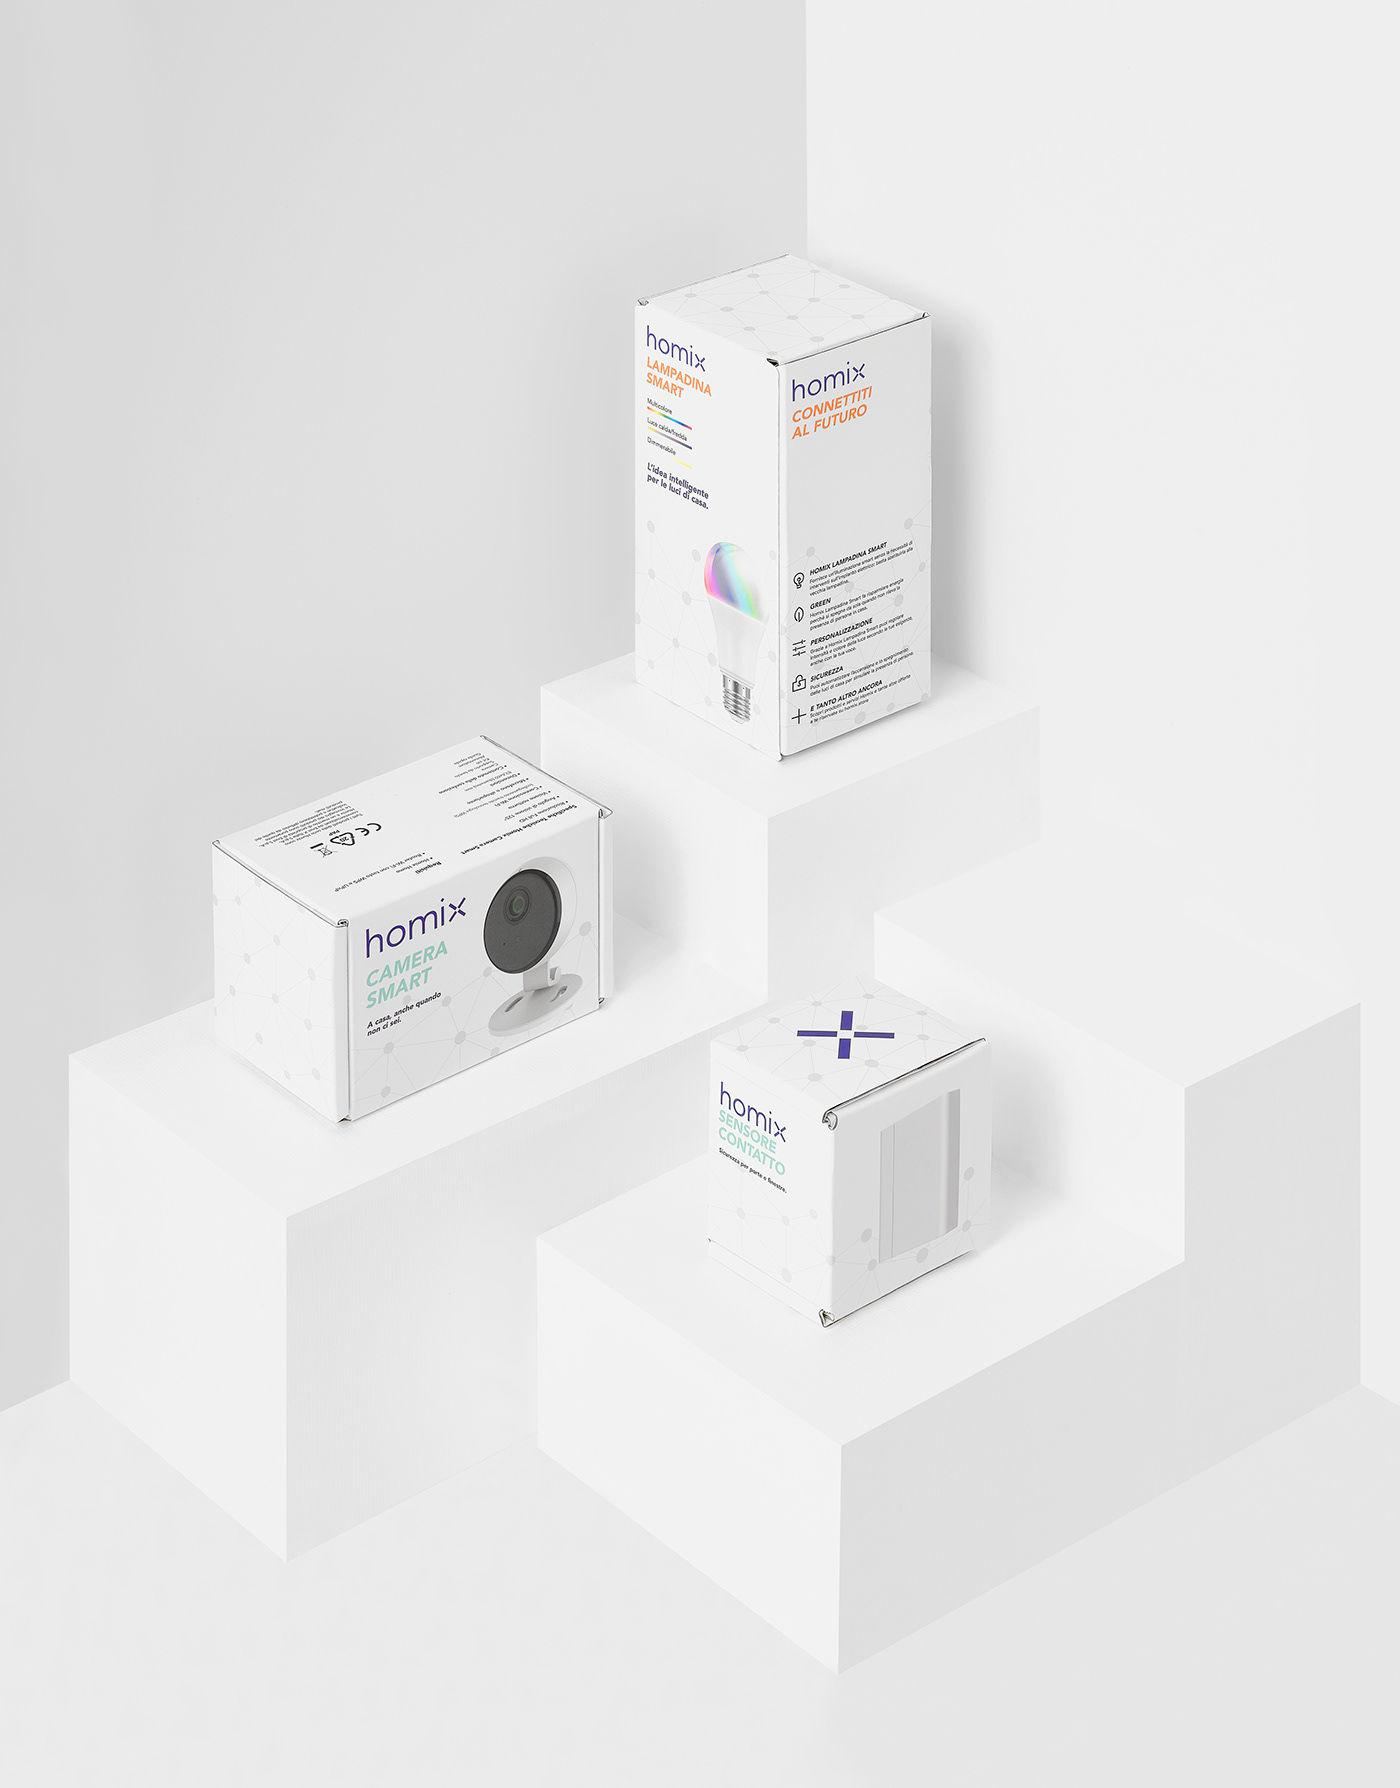 enel enel x Pack Packaging product